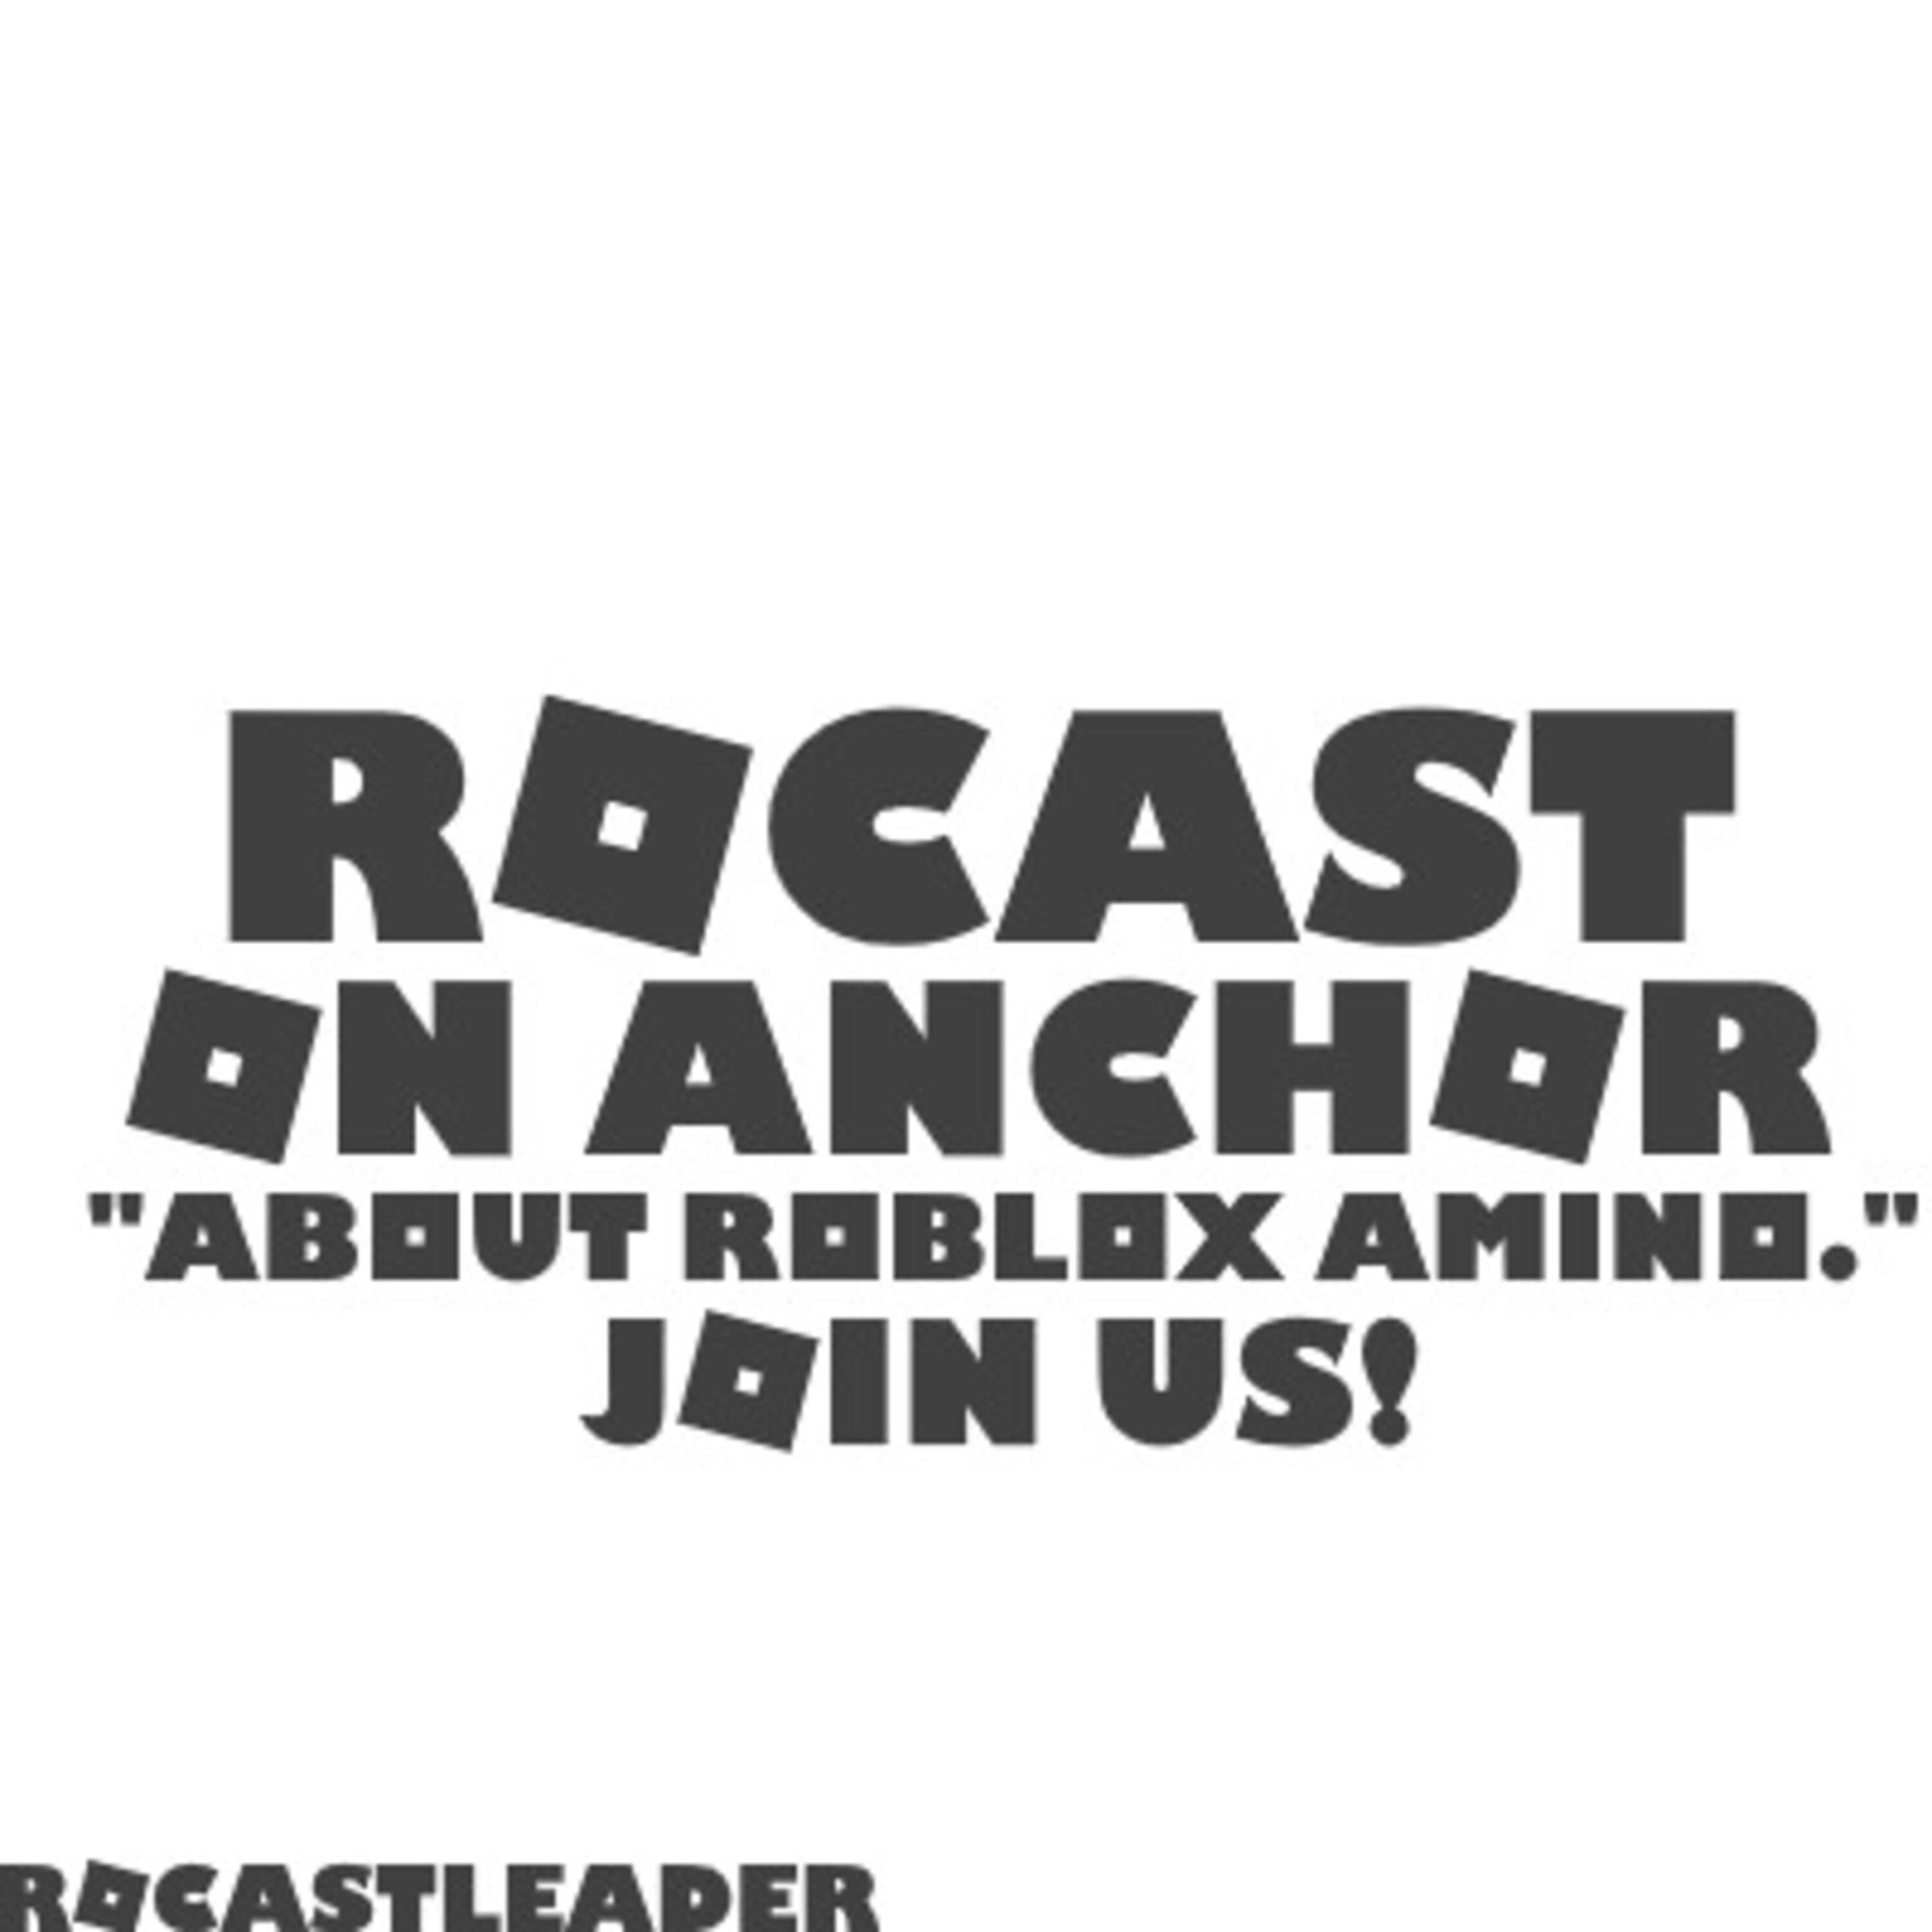 Listen Free To Rocast About Roblox Amino On Iheartradio Podcasts Iheartradio - roblox news roblox amino